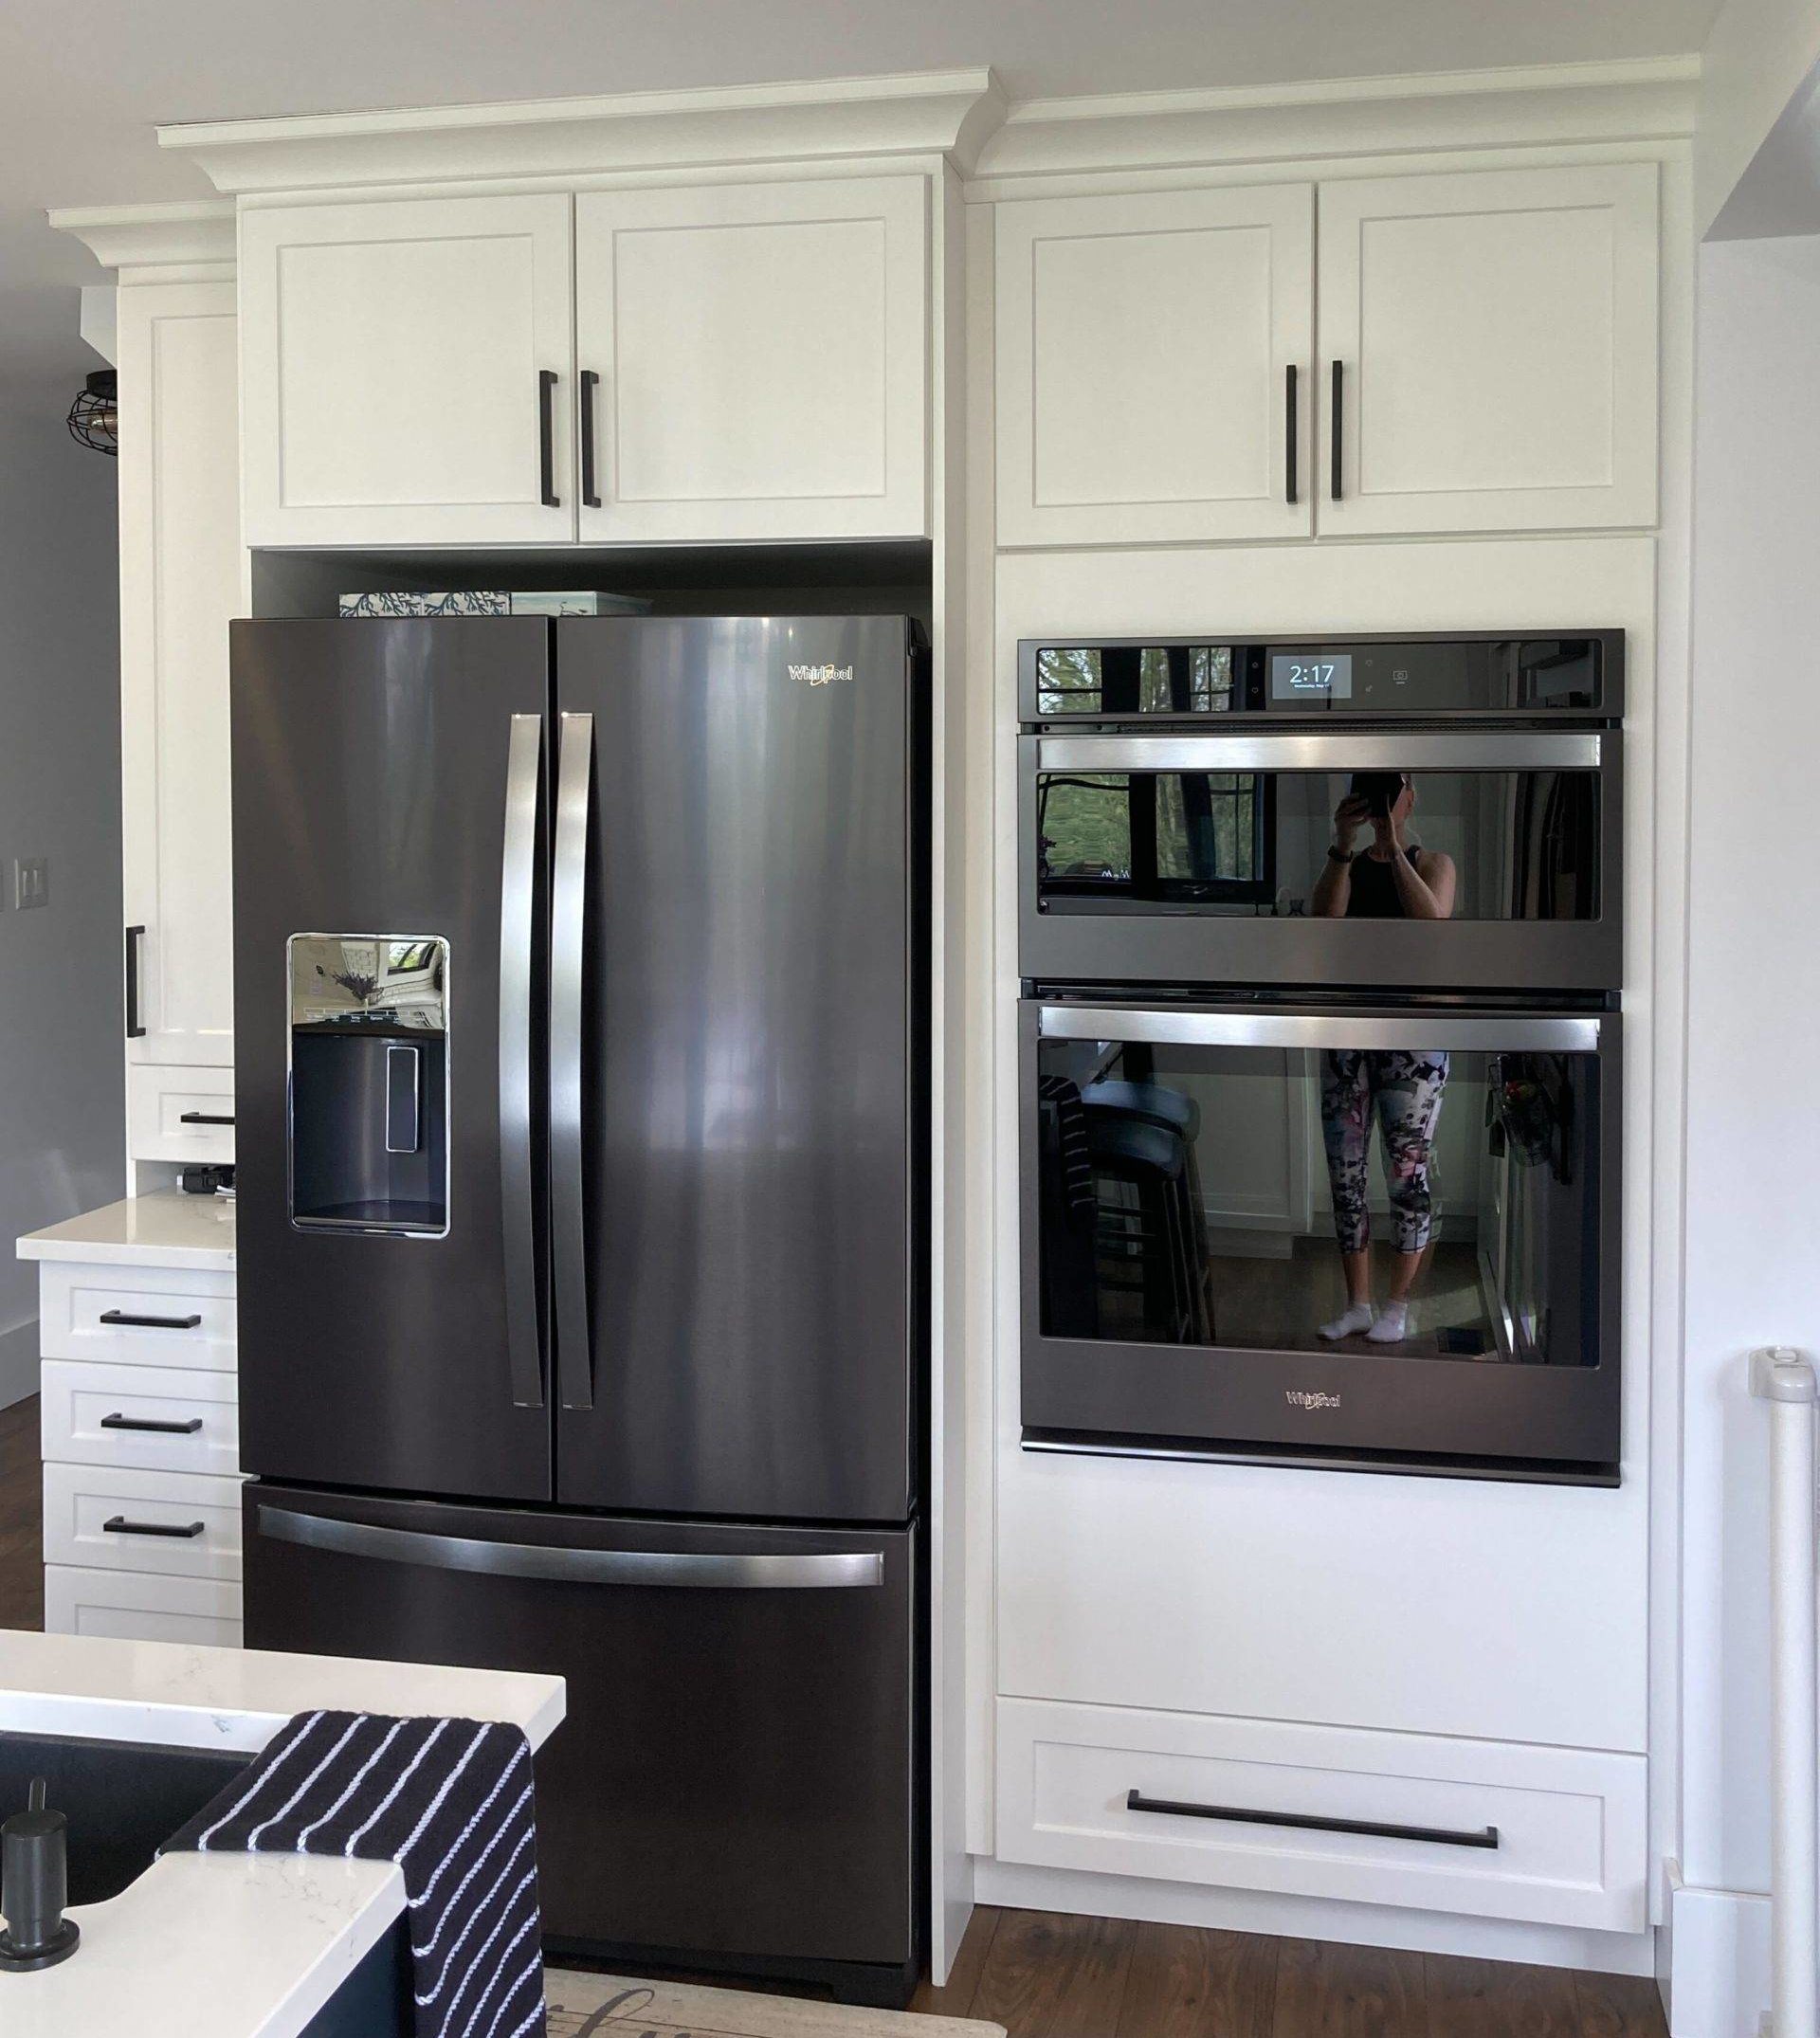 black stainless steel kitchen appliances against white cabinets